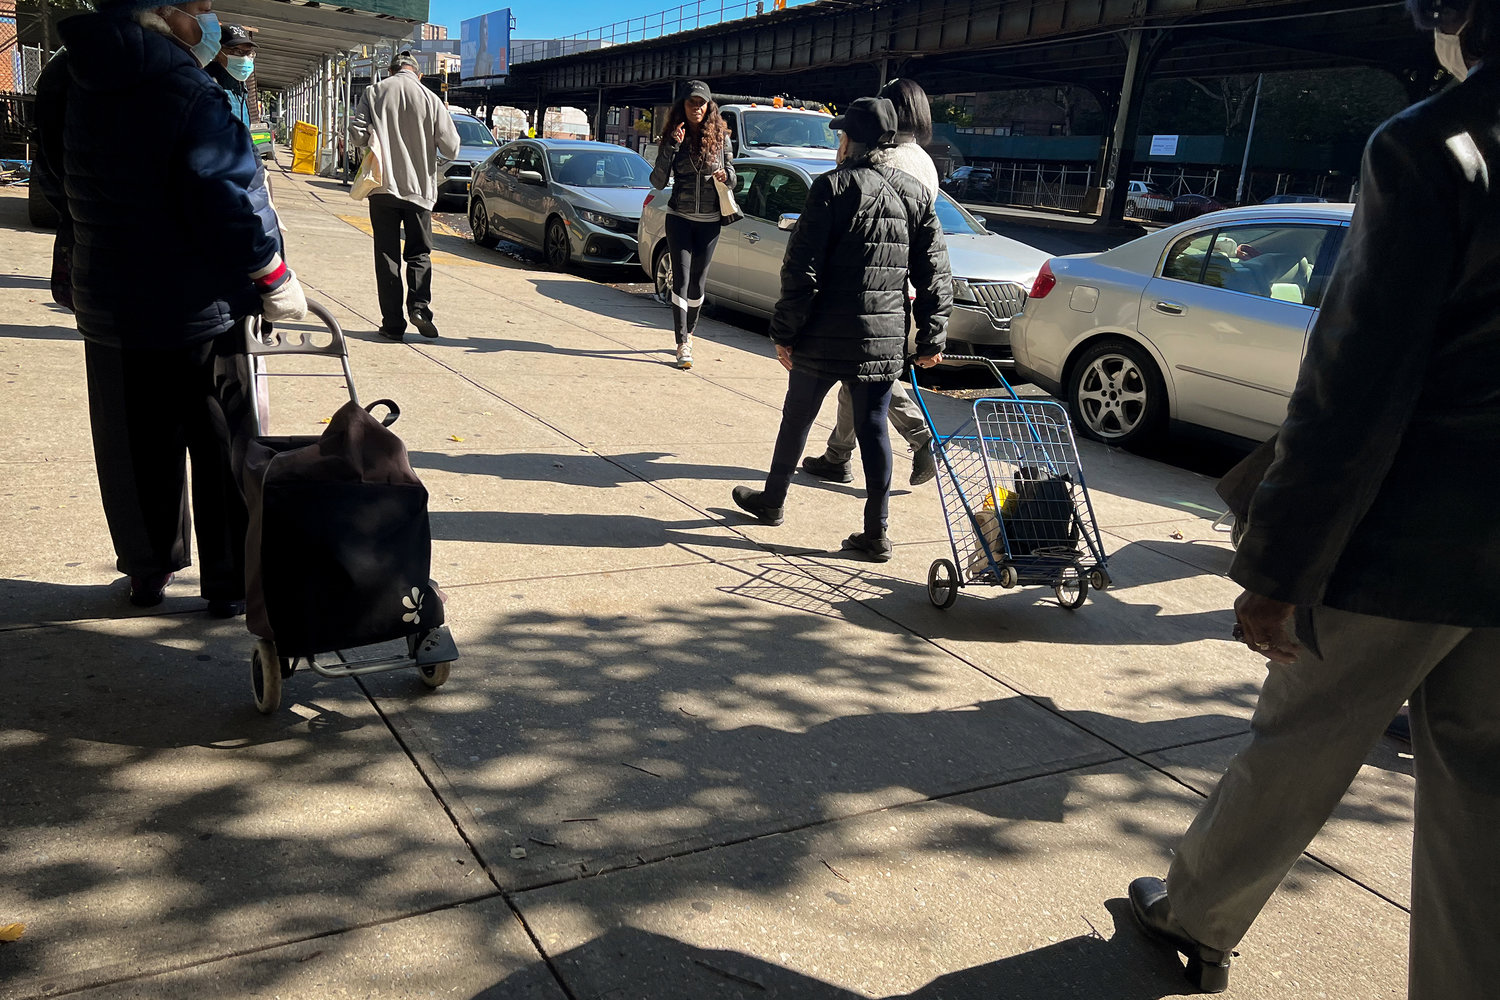 Marble Hill Senior Center residents take a 1-mile walk to Shop & Stop on Oct. 11 to purchase food and learn how to read food labels for nutritional value.